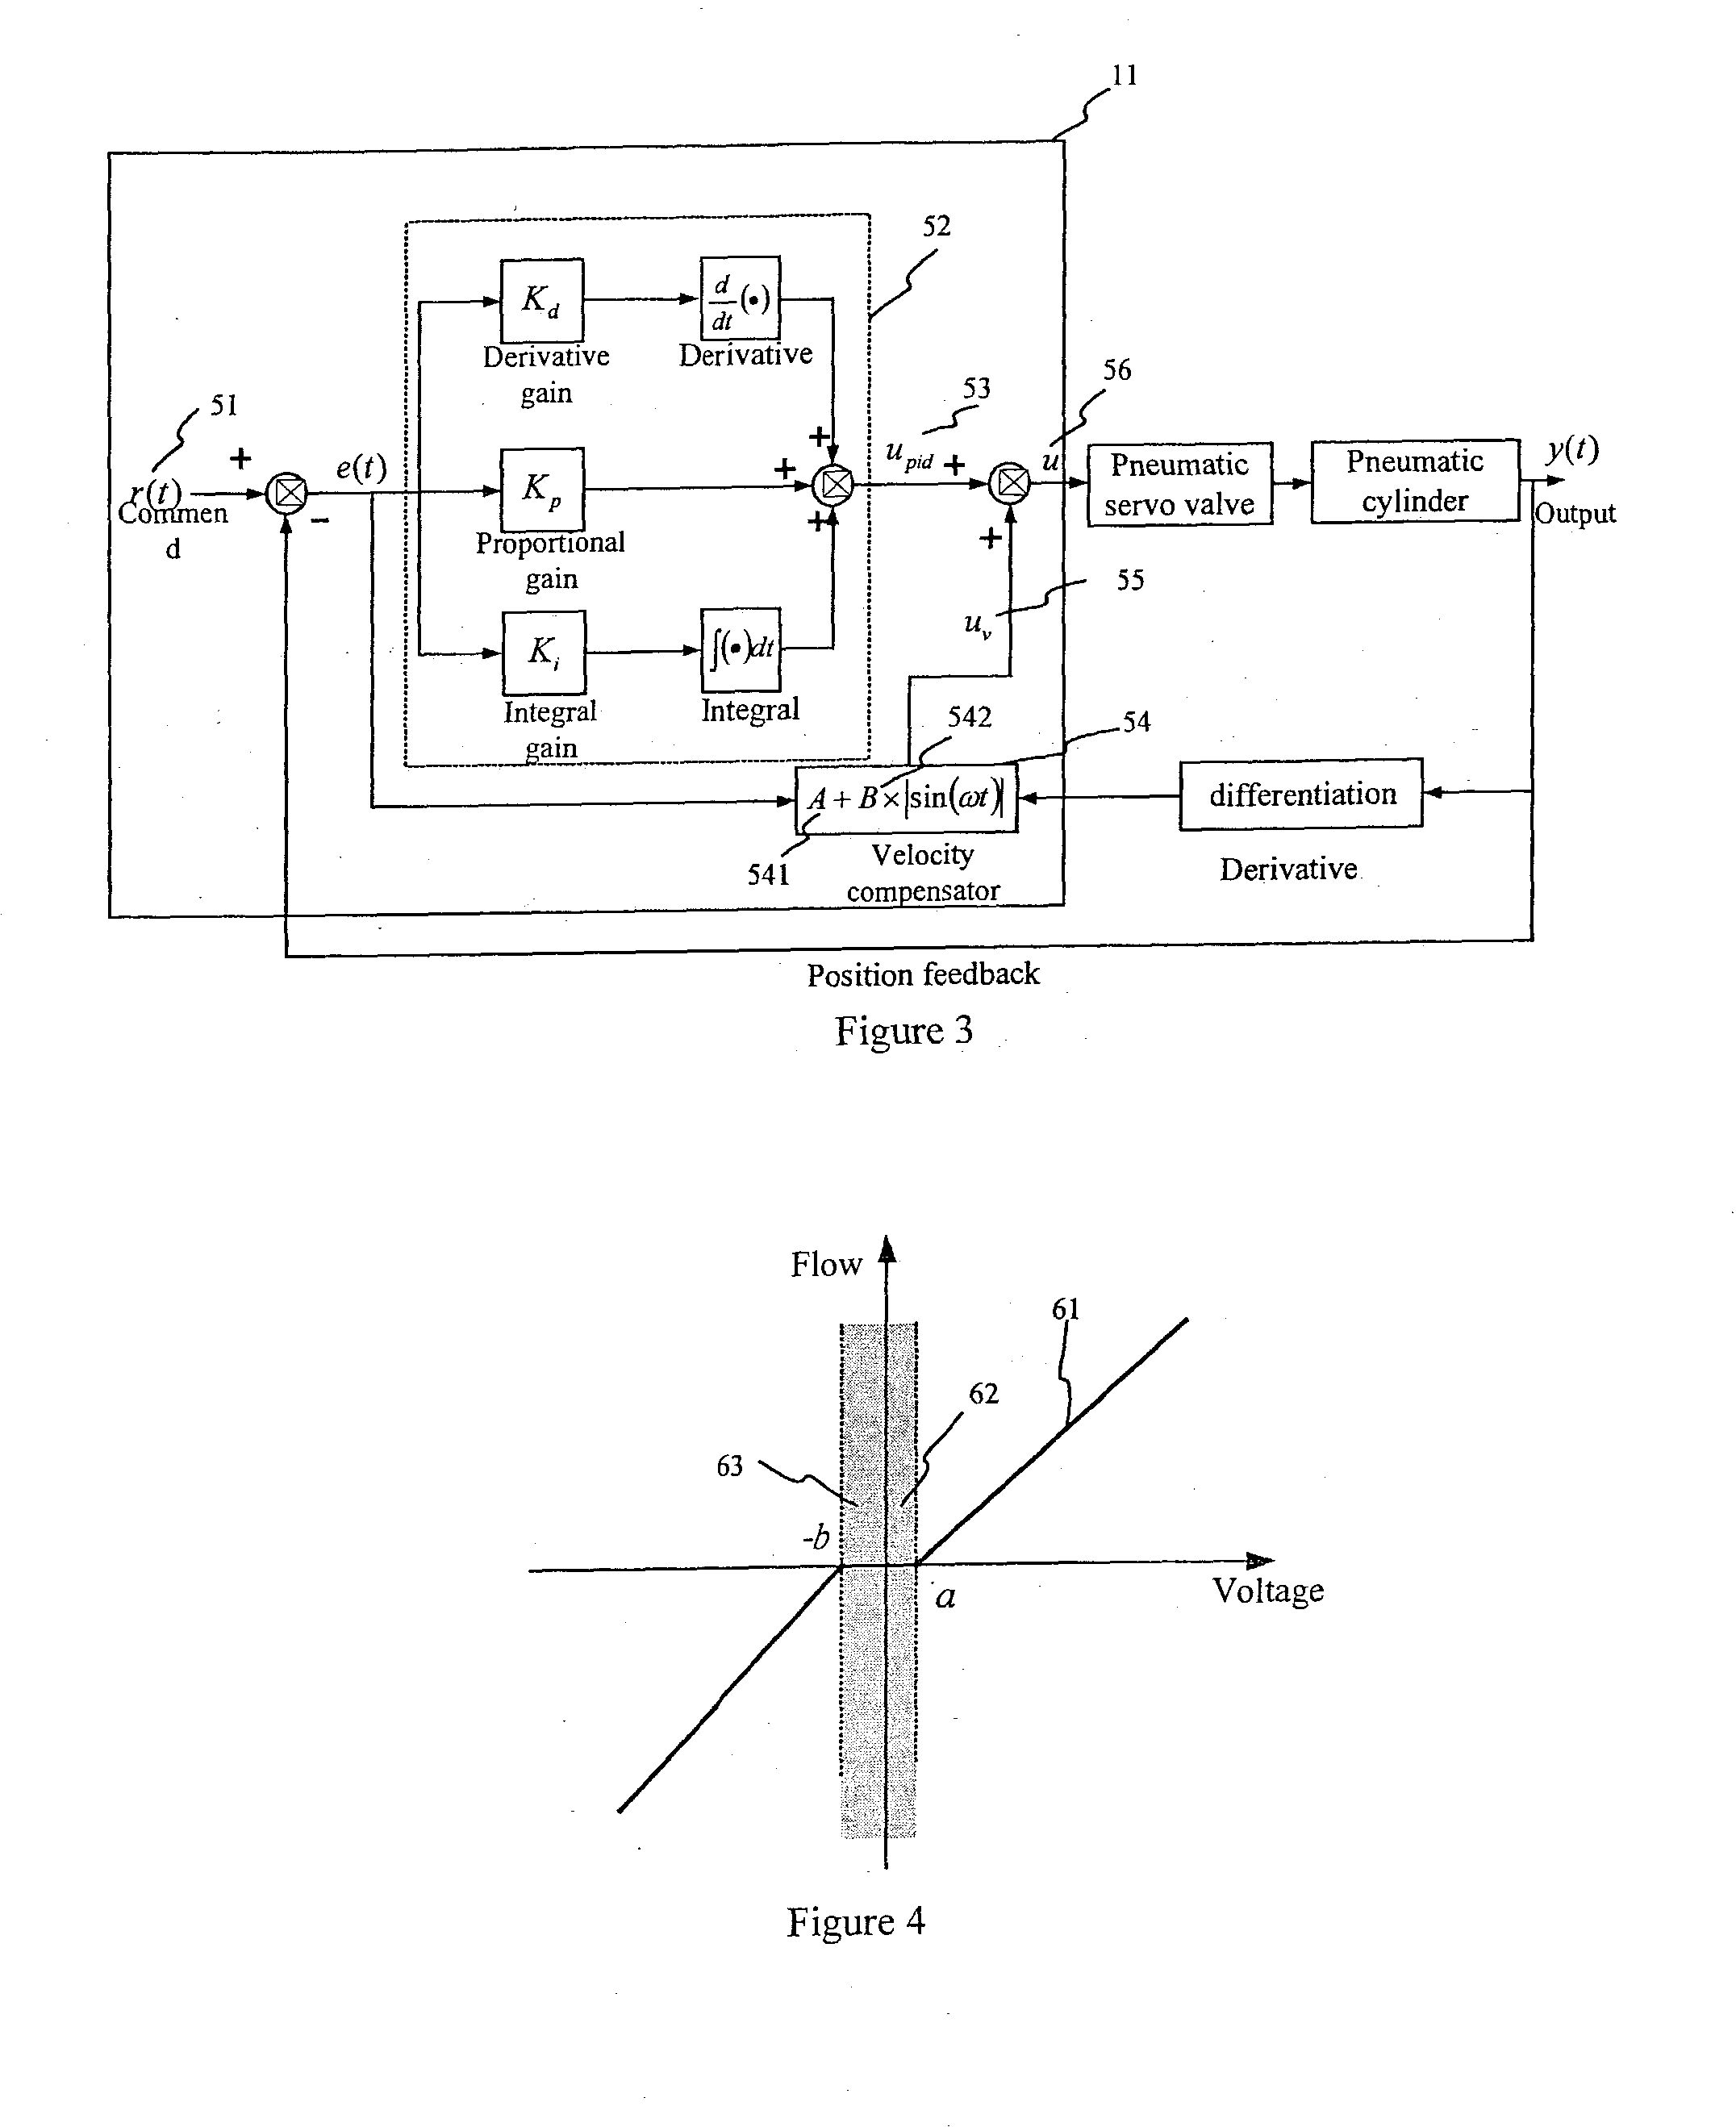 Design and control method of a micro-nanometer precision servo pneumatic X-Y positioning table